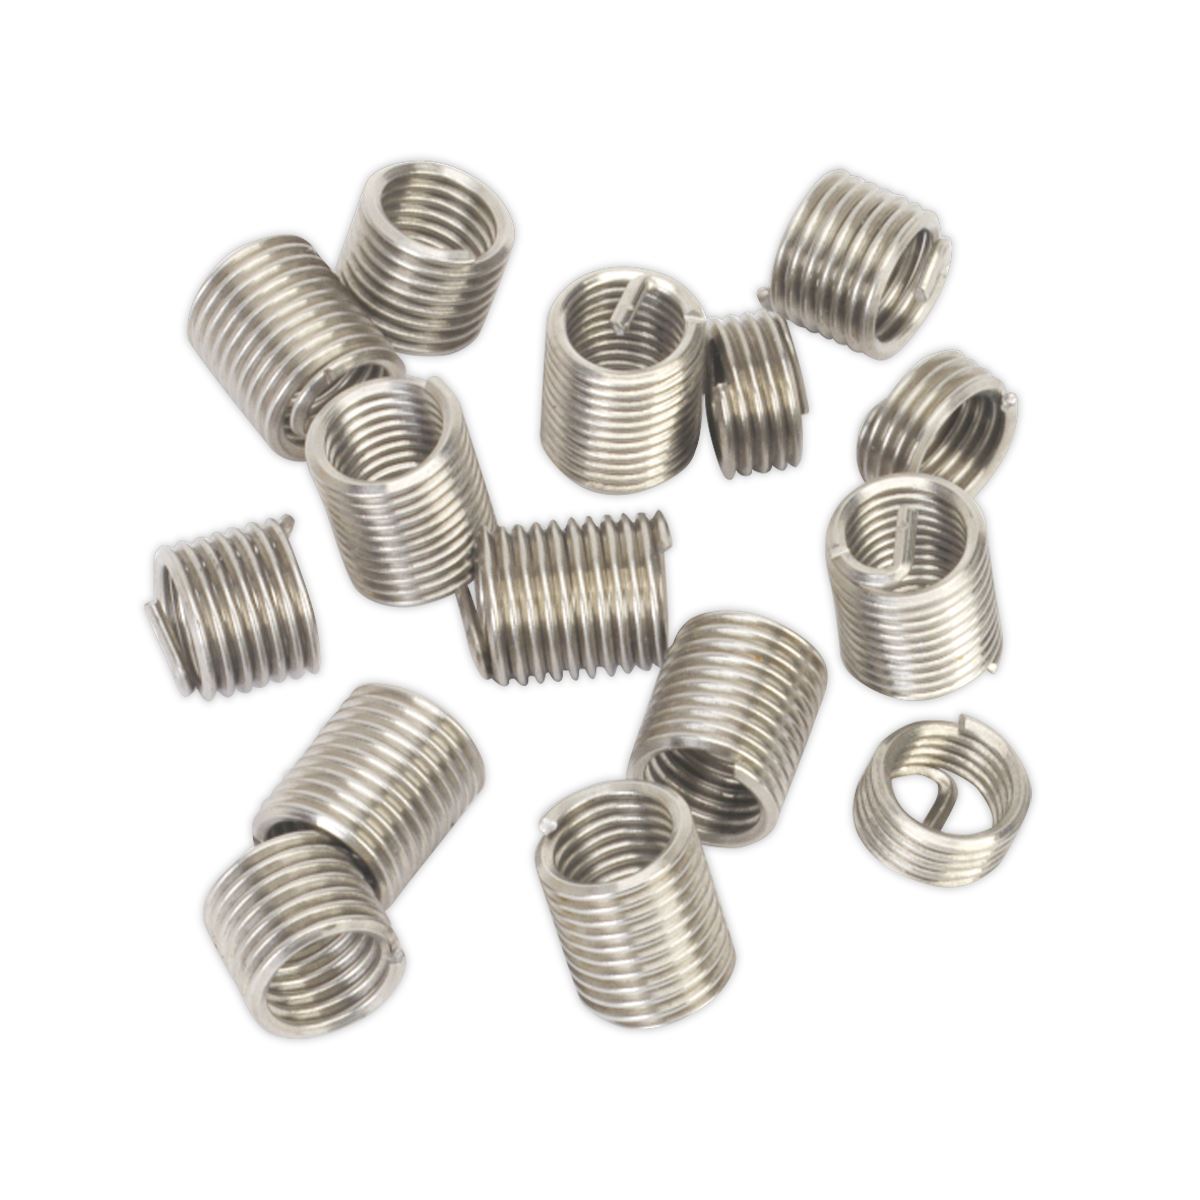 Sealey Thread Insert M8 x 1.25mm for TRM8 Threaded Inserts Helicoil 15 Pack